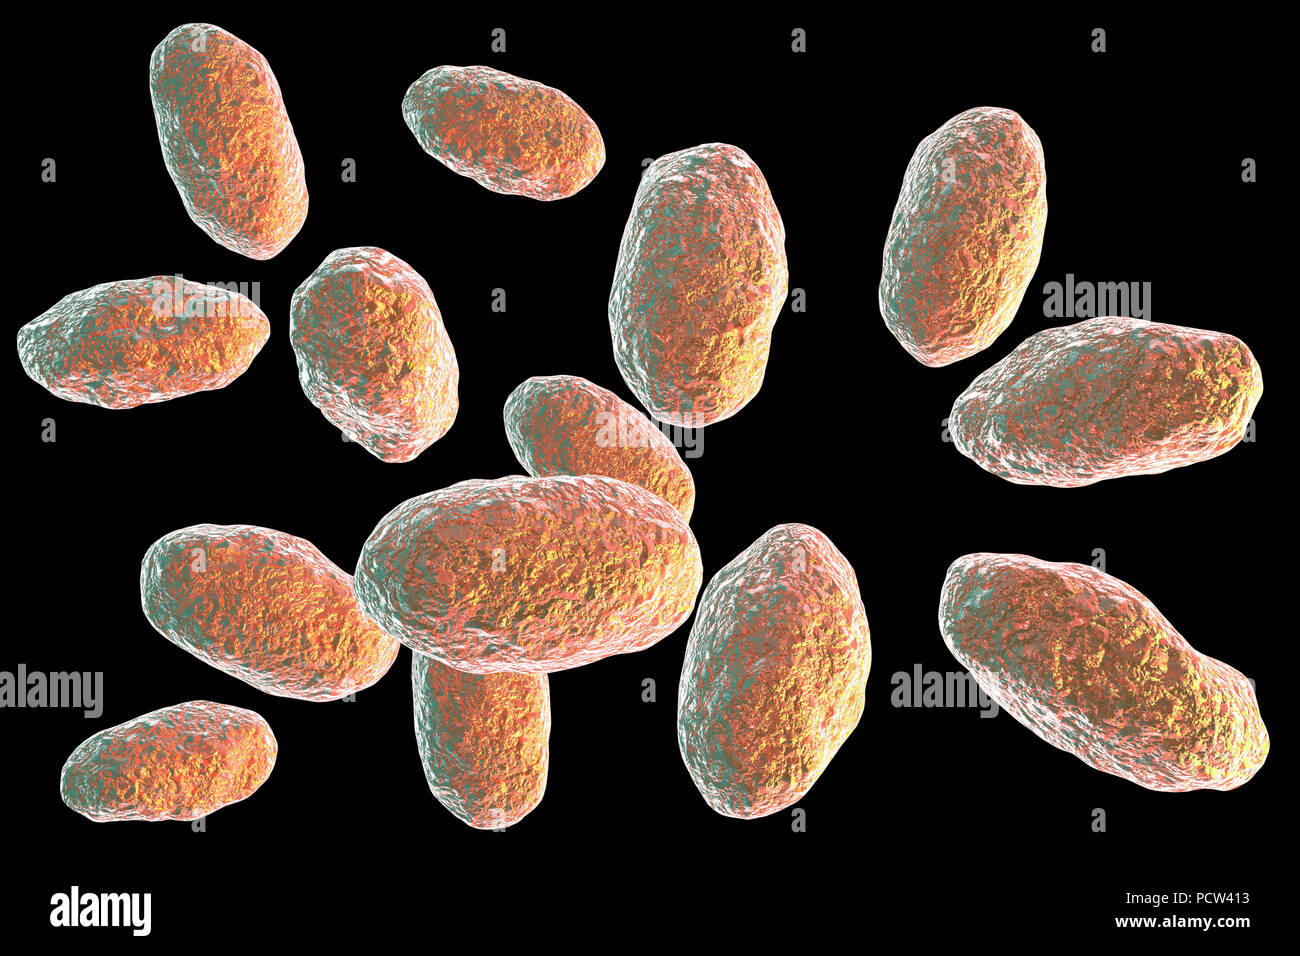 Computer illustration of the rod-shaped bacteria Yersinia pseudotuberculosis (Gram negative), an enterobacteria and the causative agent of Far East scarlet-like fever in humans. By symptoms it is similar to infection caused by Yersinia enterocolitica (fever and right-sided abdominal pain), but diarrhea is often absent. Stock Photo